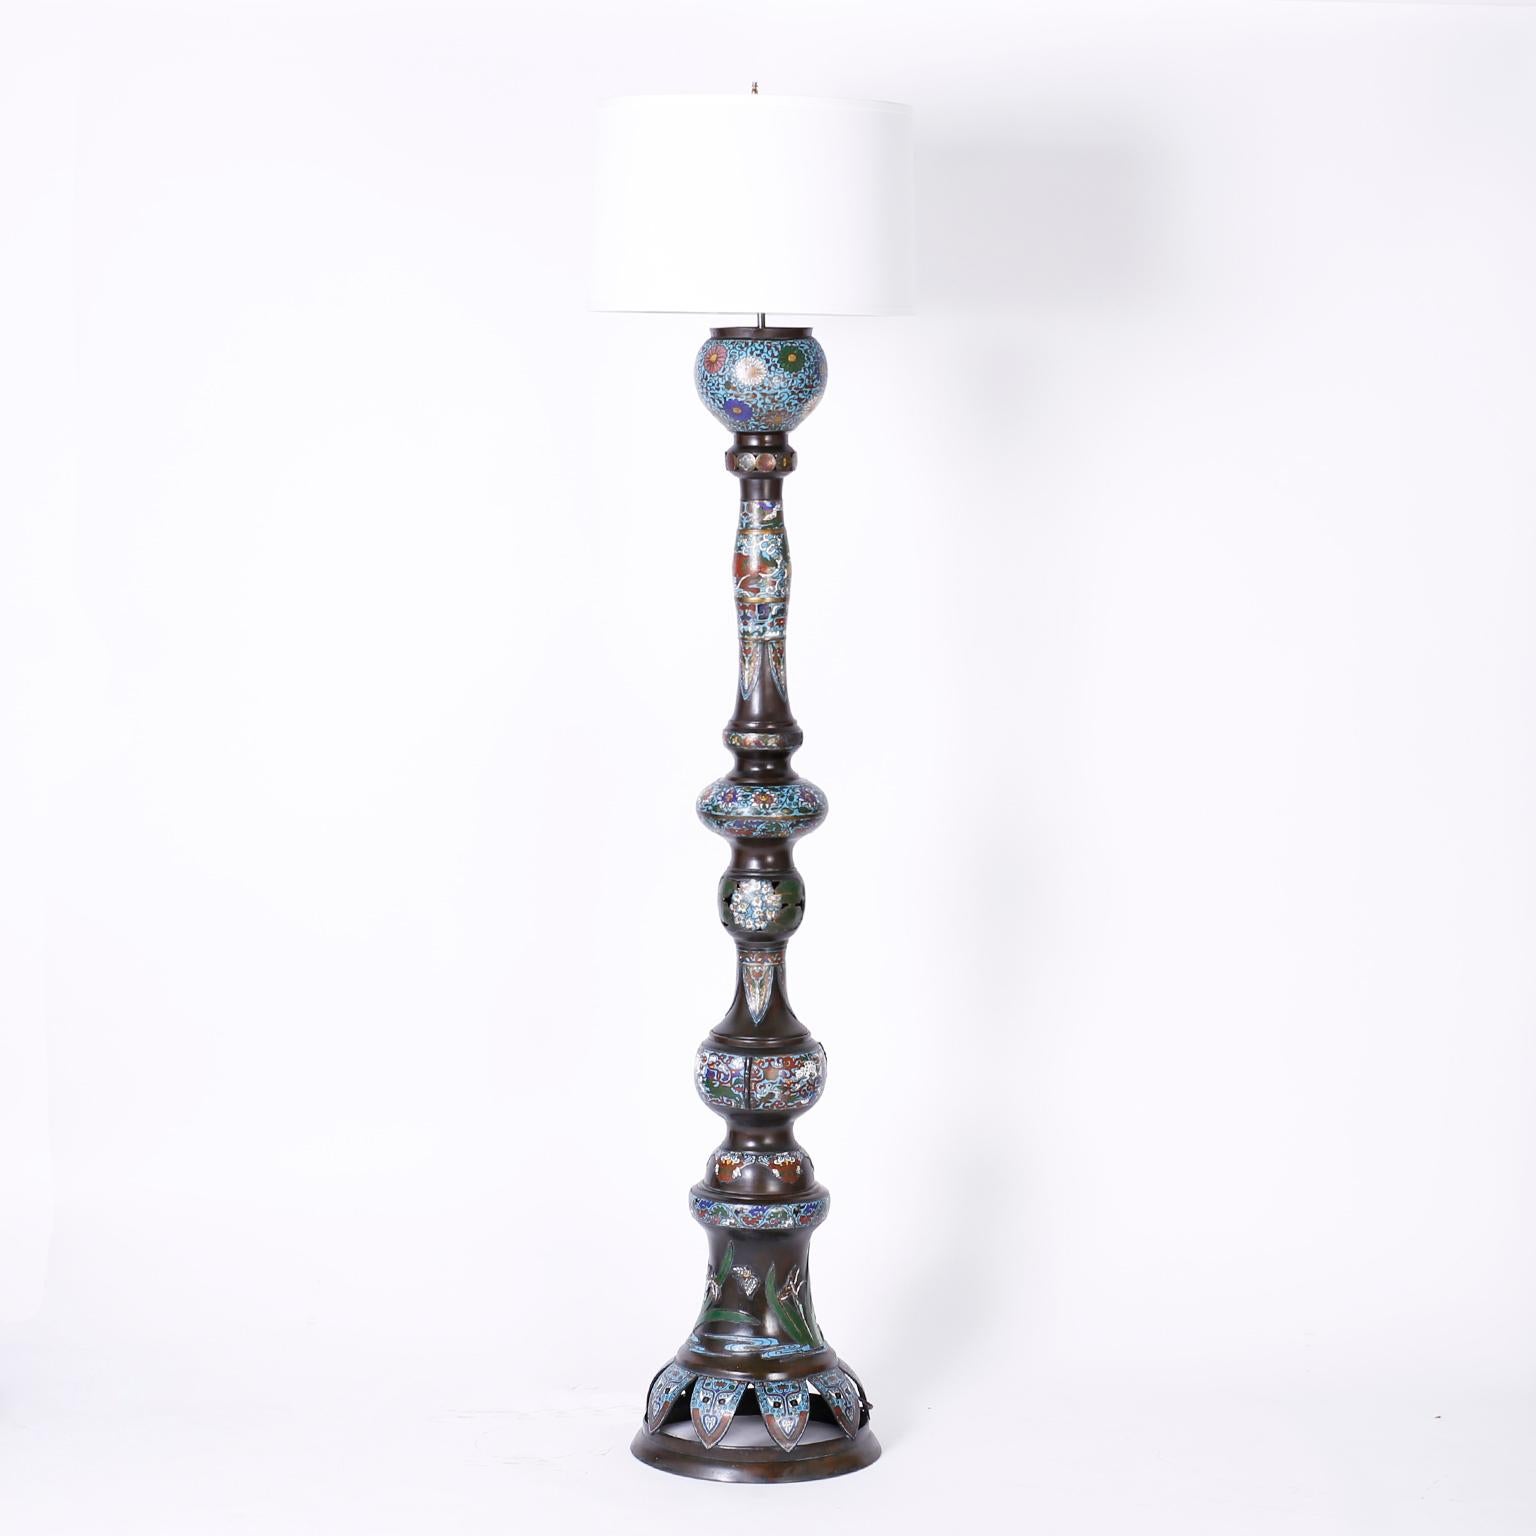 Rare pair of statuesque antique Cloisonné floor lamps crafted in bronze and decorated with enamel in floral and geometric designs.